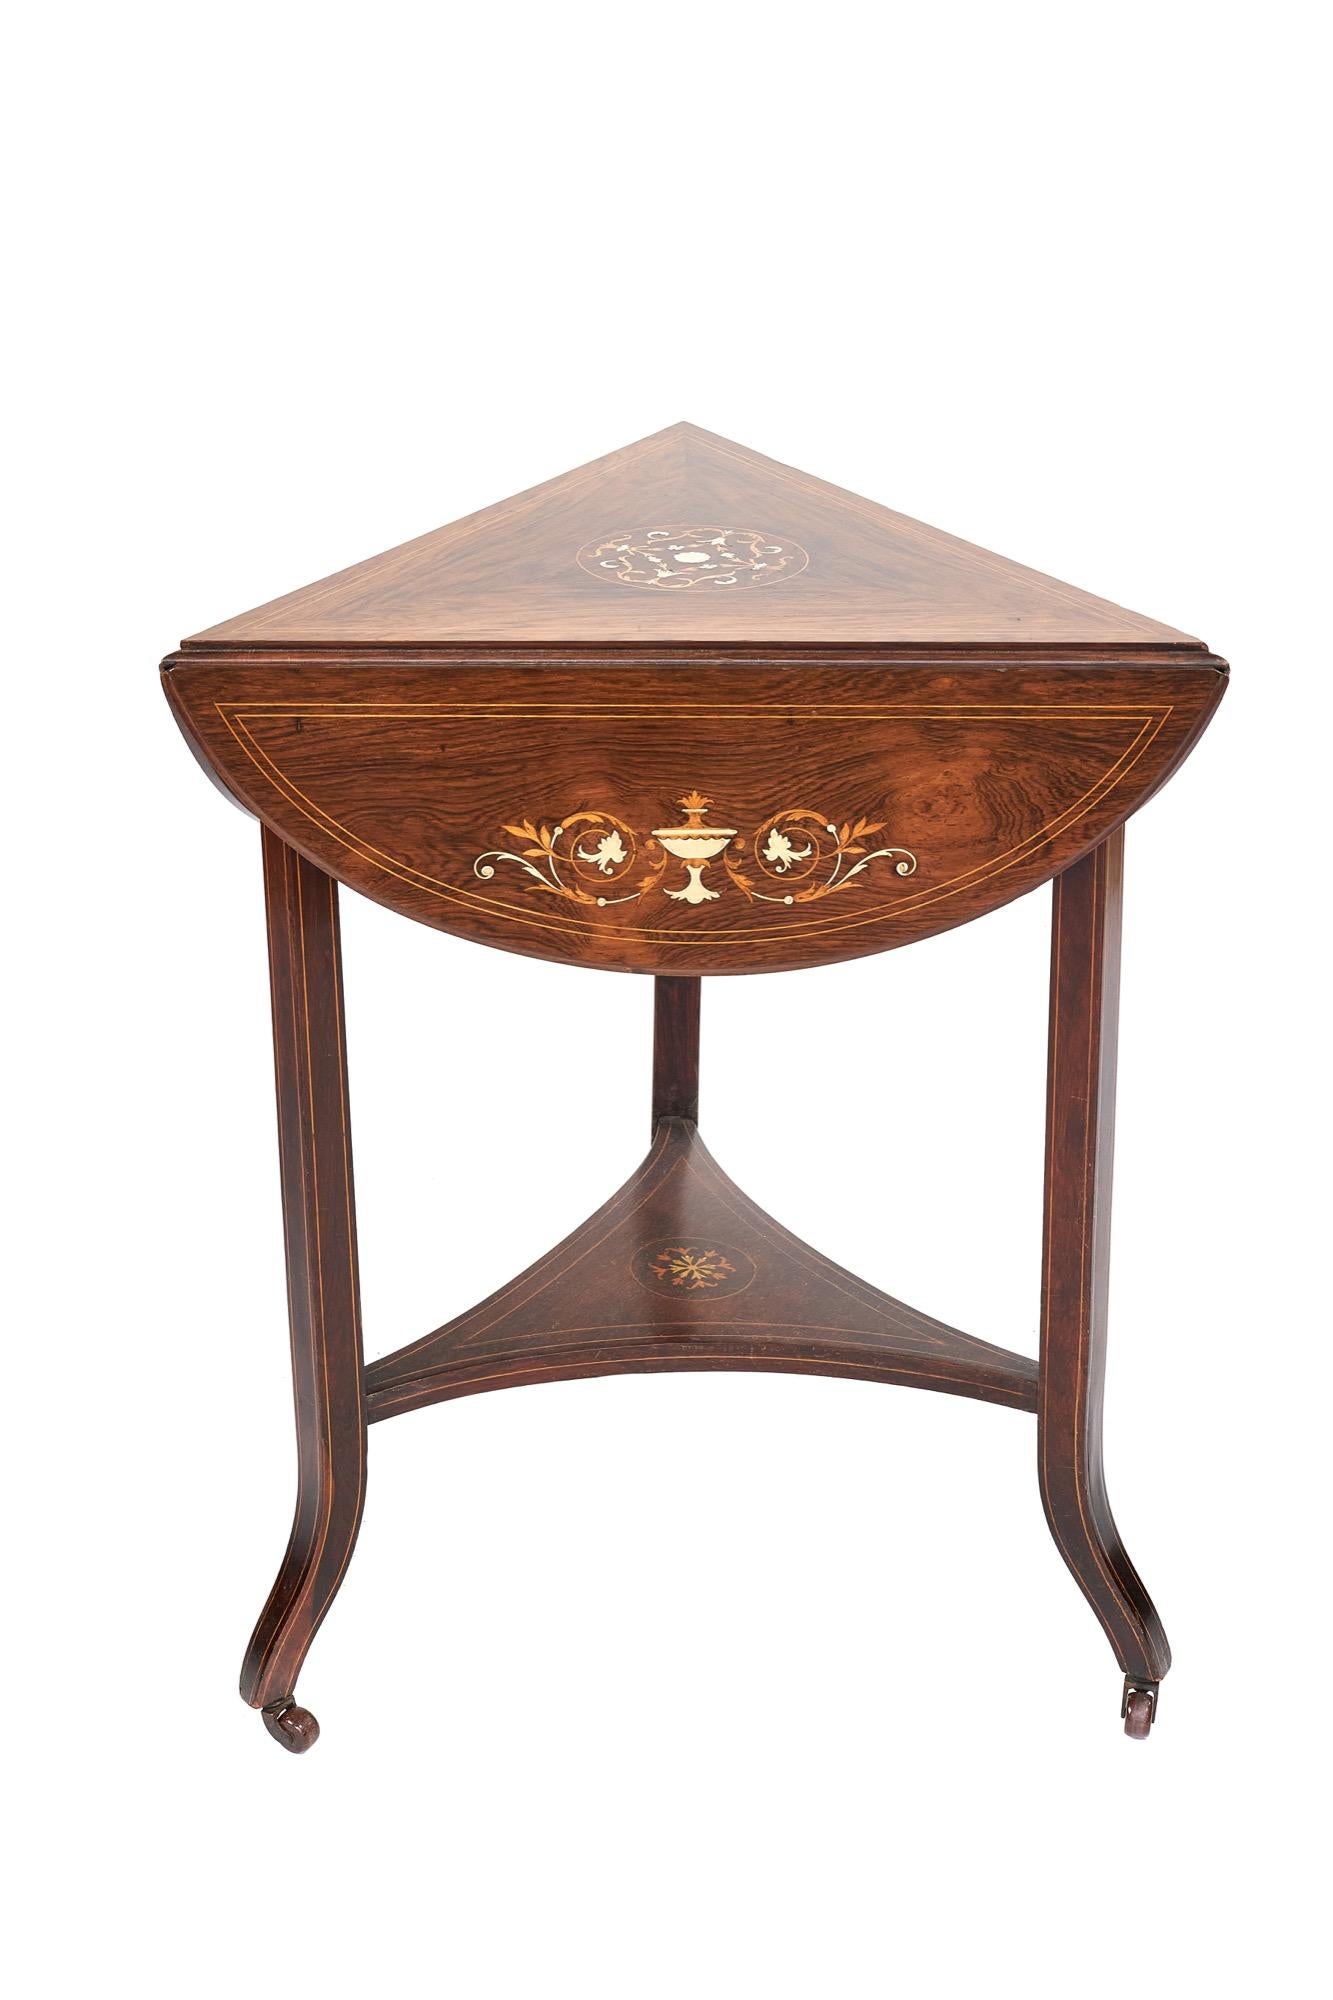 English Fine Unusual Antique Edwardian Rosewood Inlaid Drop Leaf Table For Sale